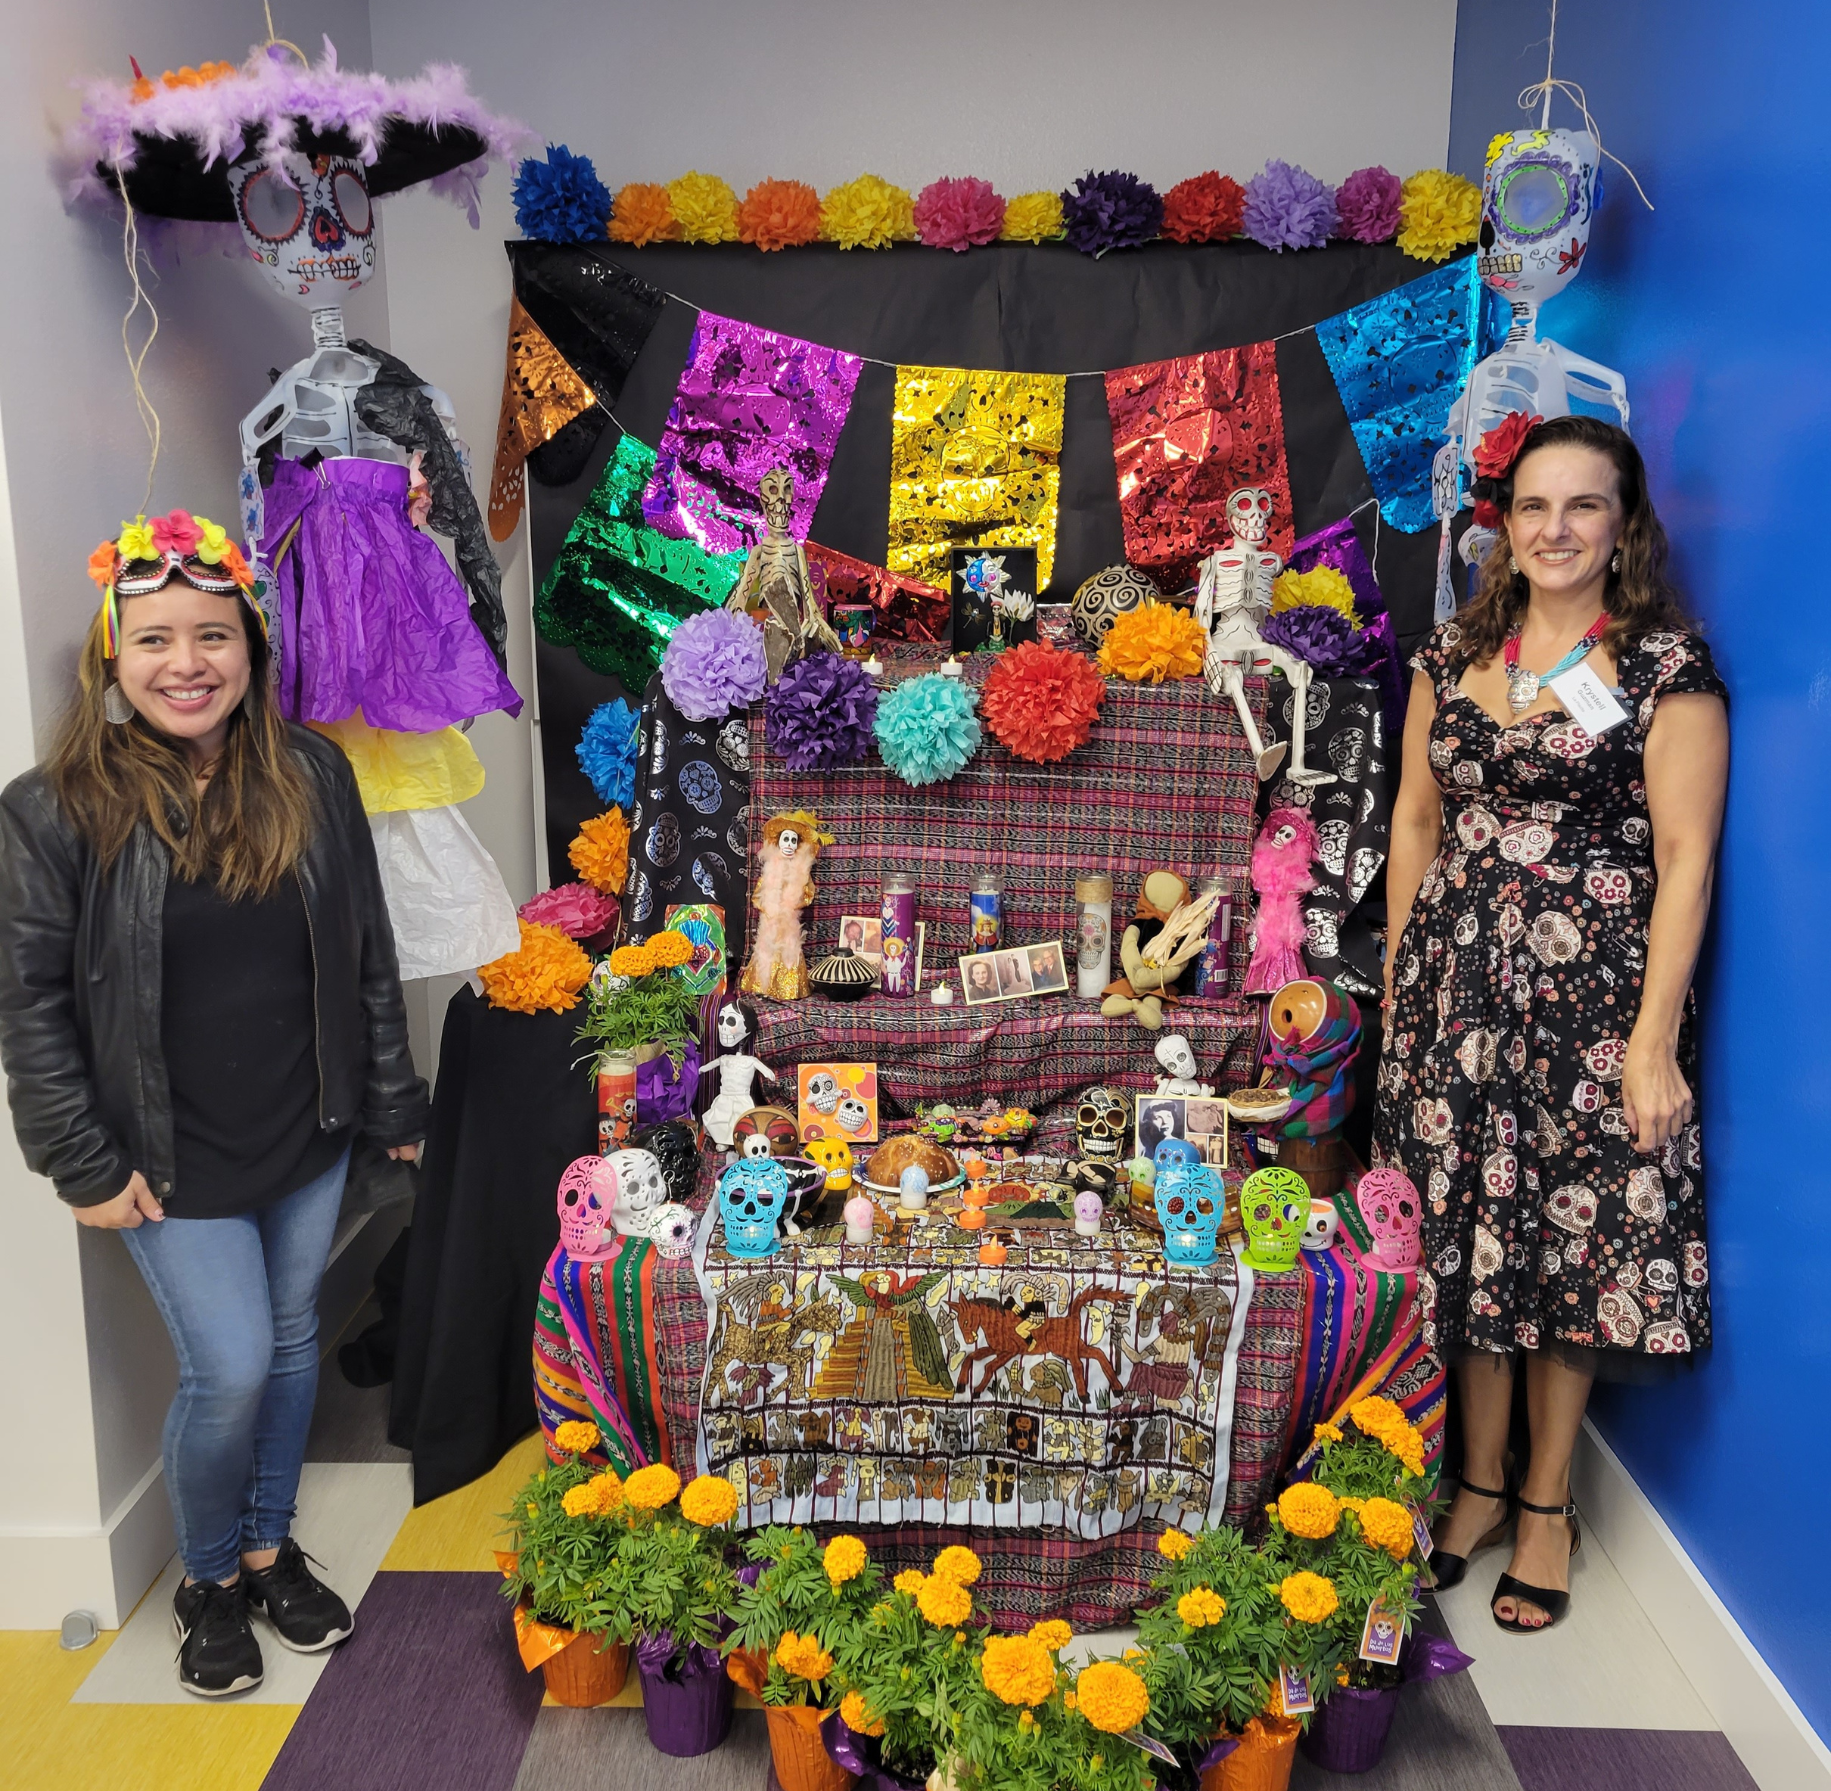 Two Plazita Schools staff members stand with a cultural display